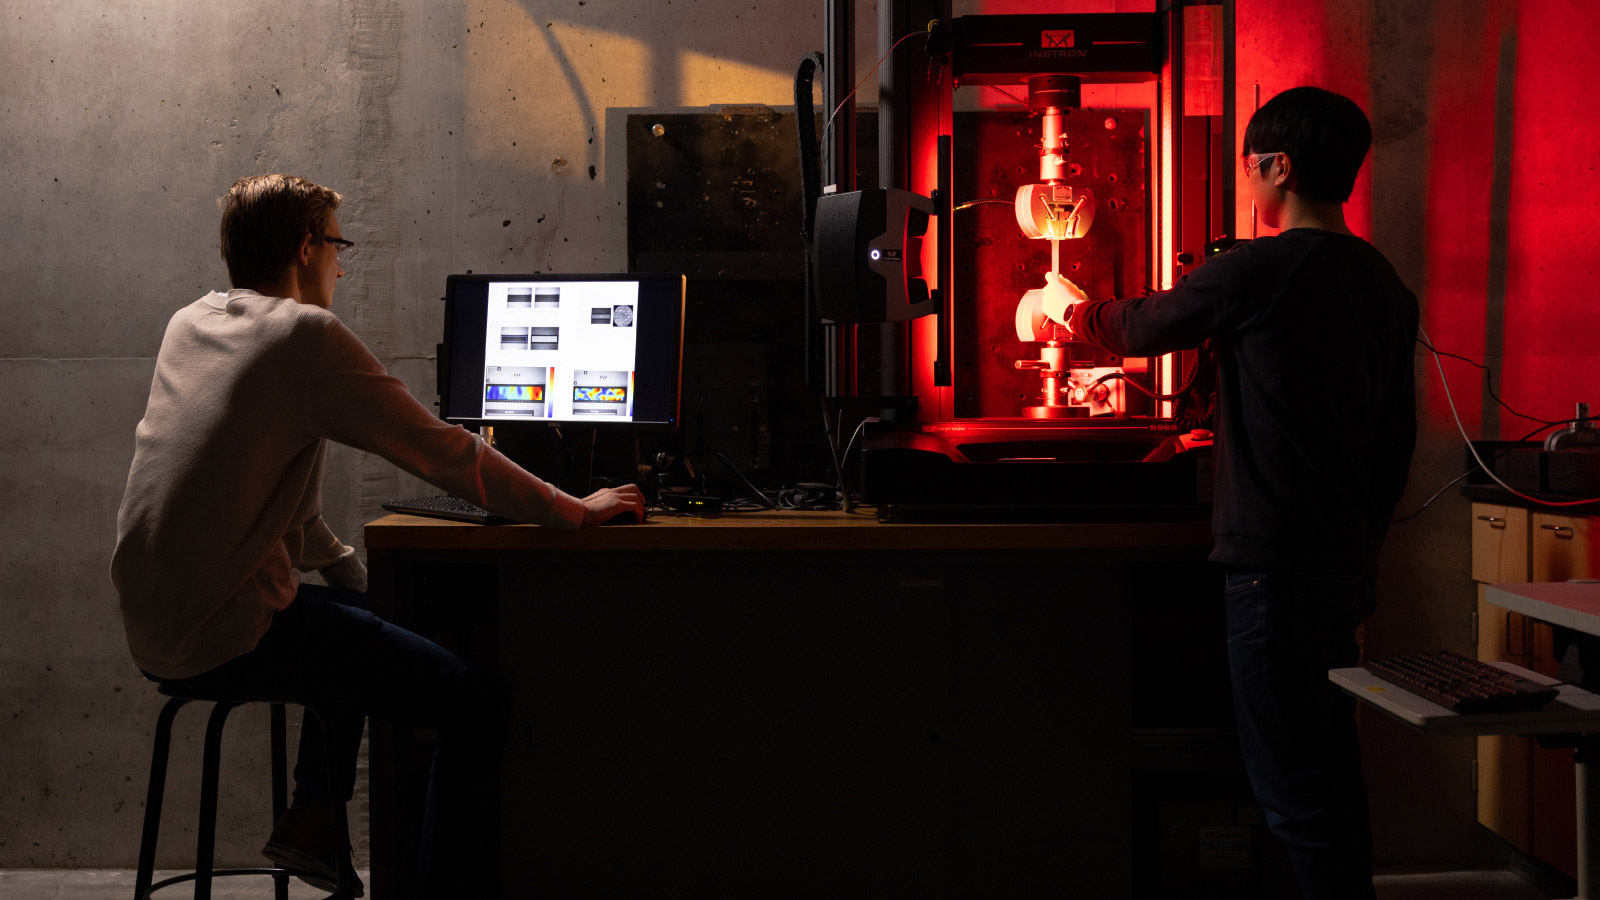 Two students working a computer and machine, glowing red